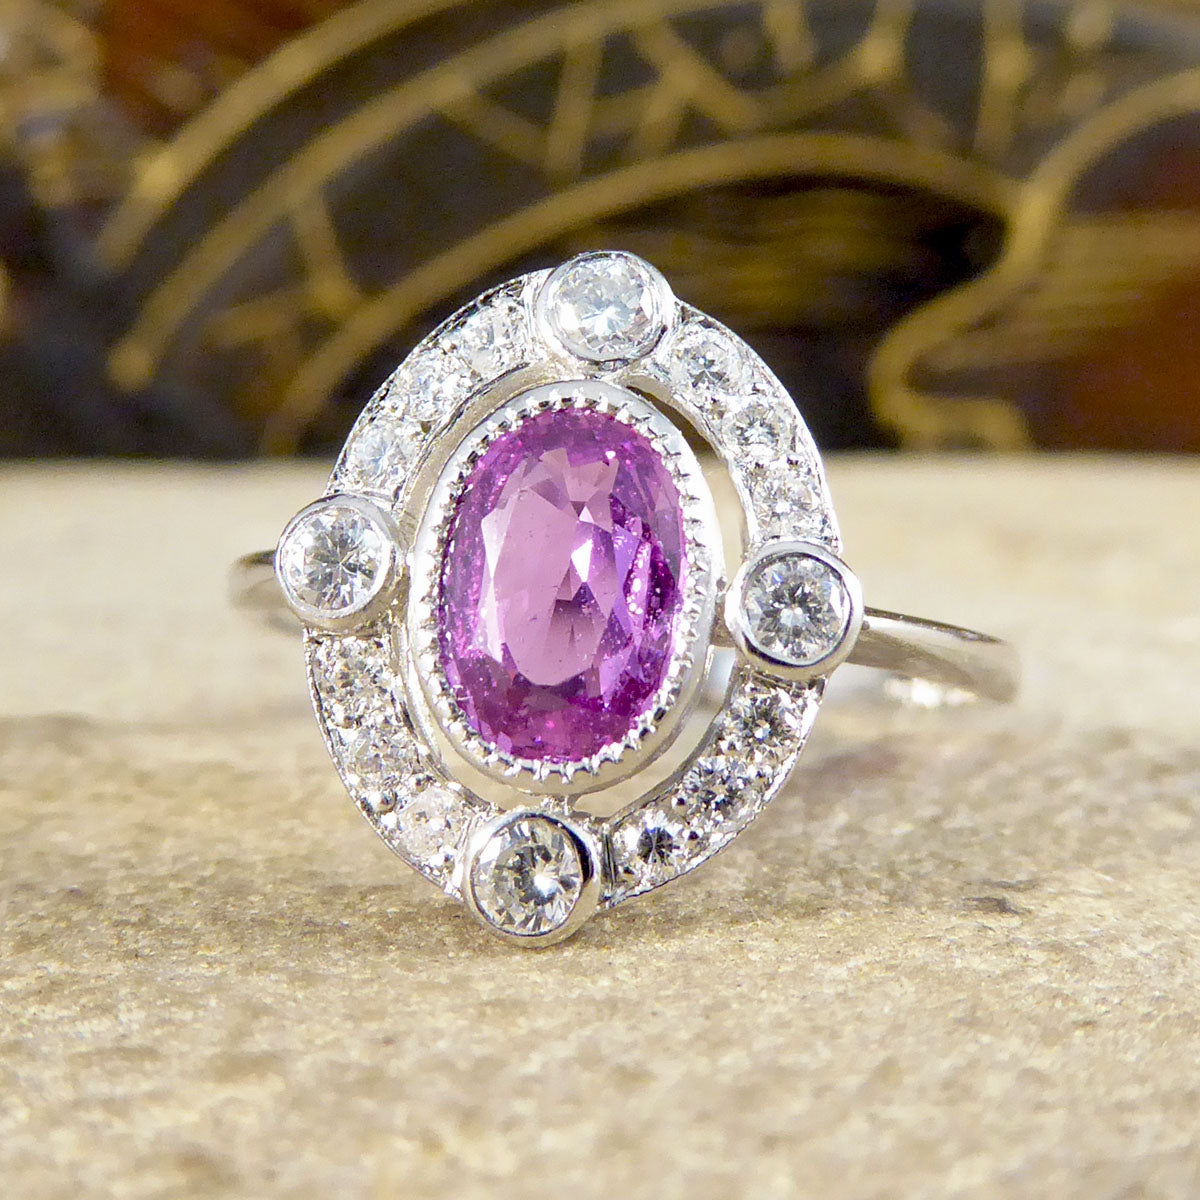 Contemporary 1.05ct Pink Sapphire and Diamond Halo Ring Mounted in Platinum